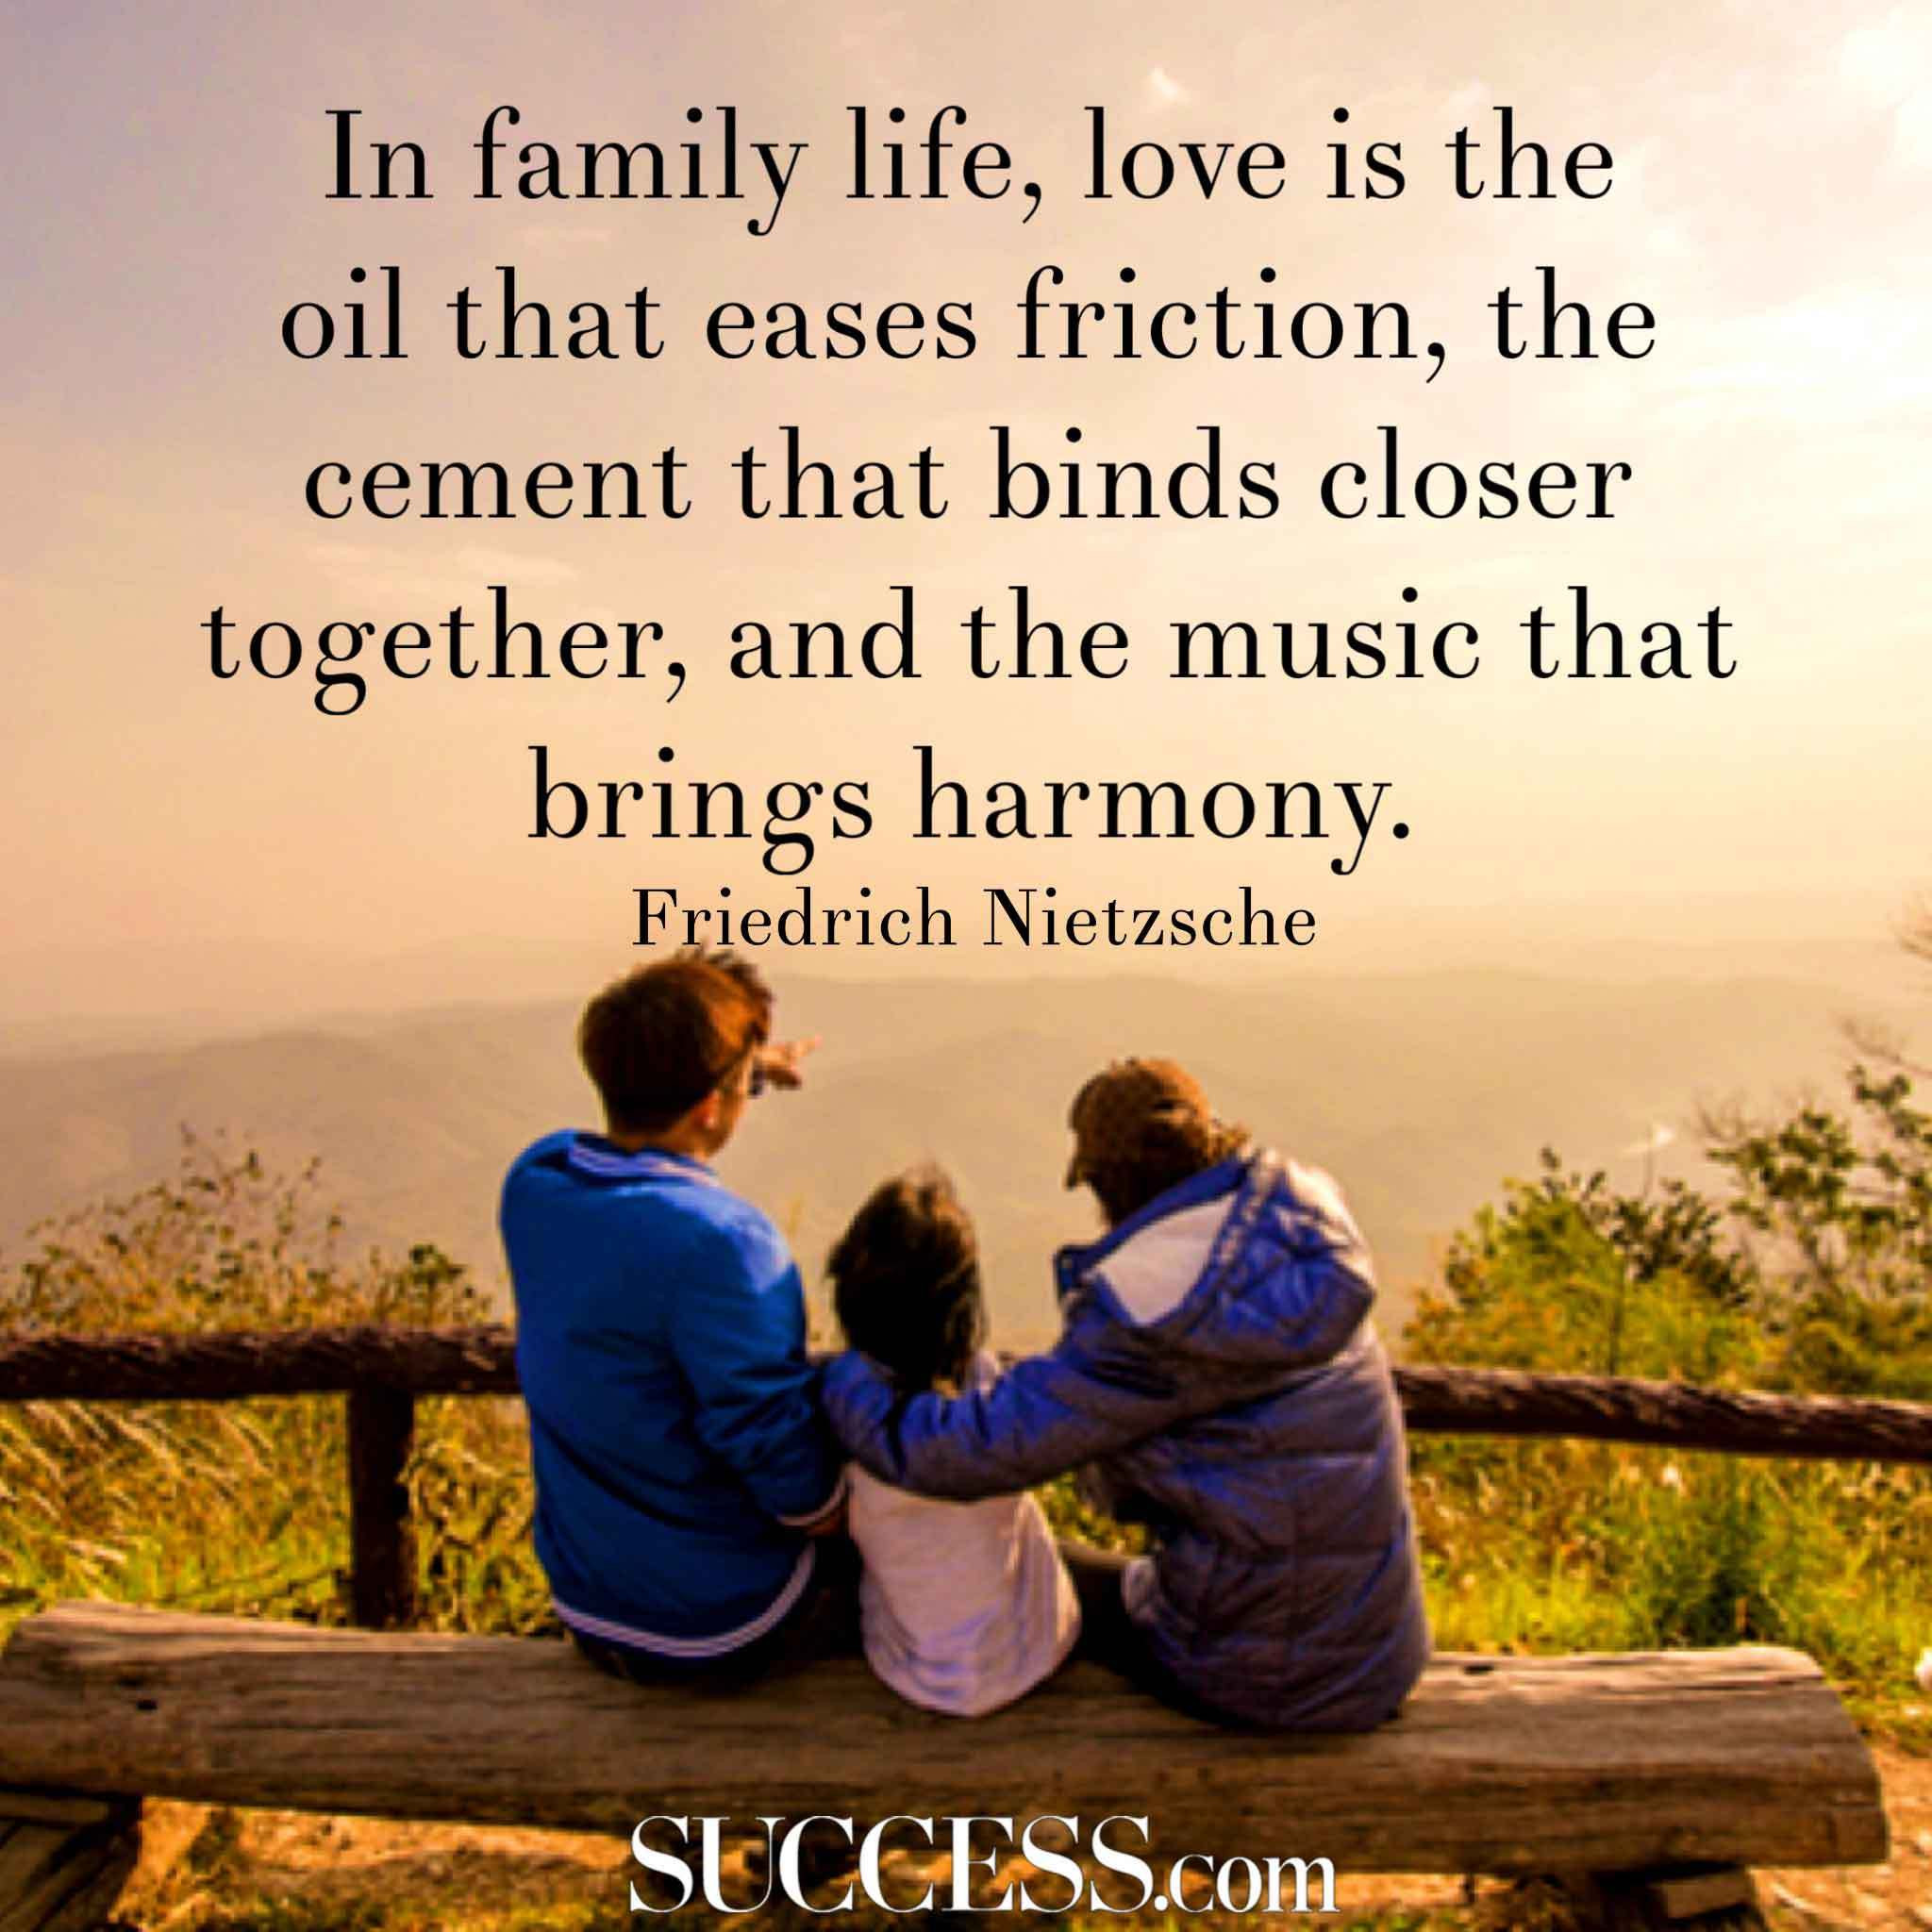 Quotes About Family And Love
 14 Loving Quotes About Family